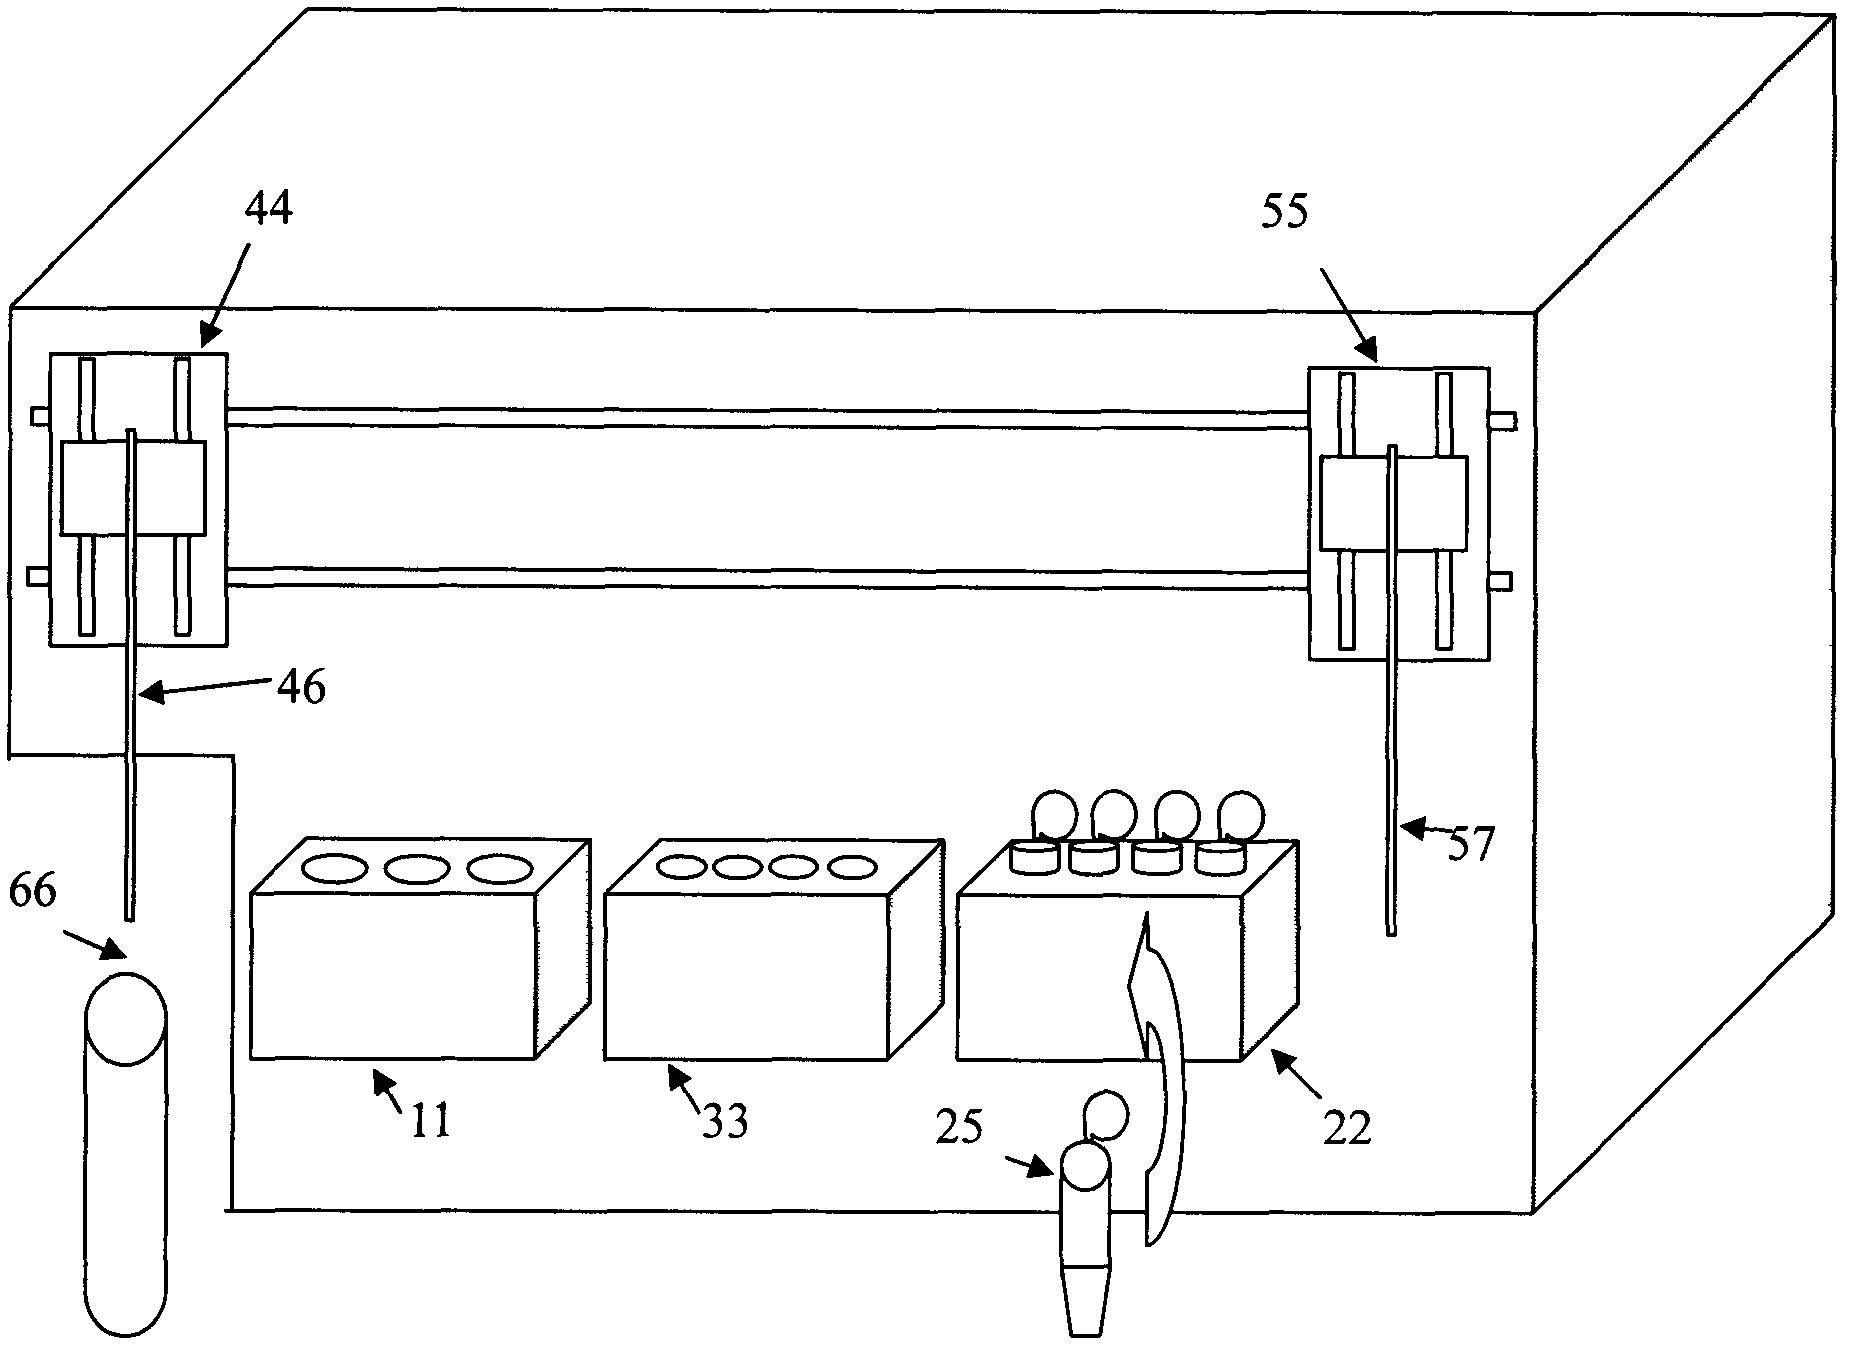 Automatic device and methods for particle analysis